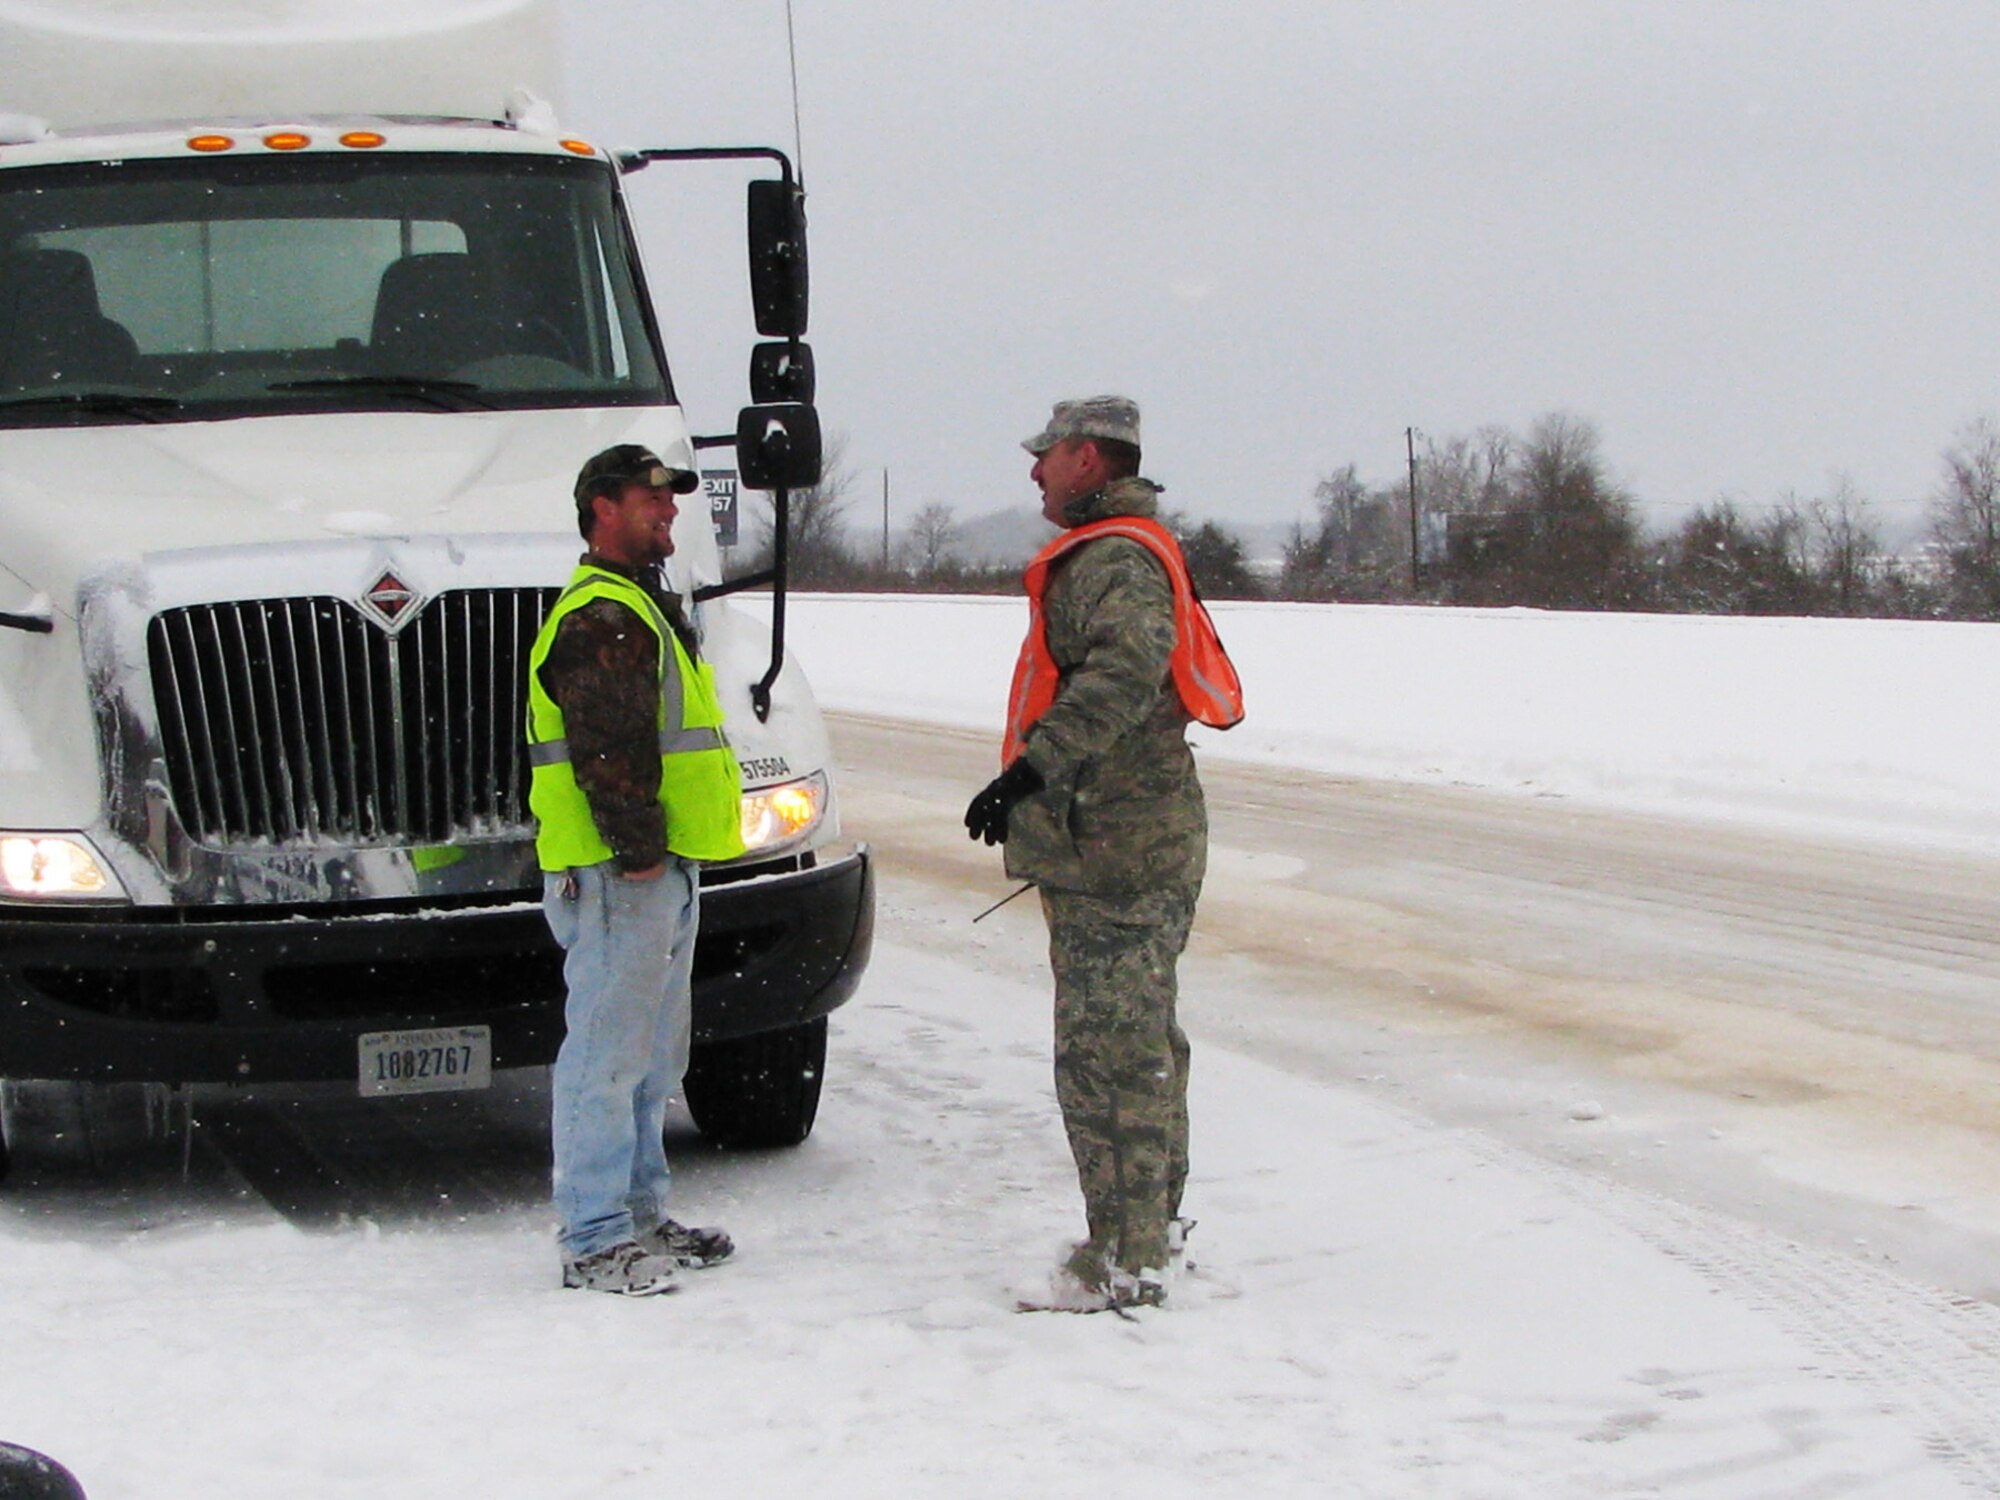 Tech. Sgt. James Crawford (right), a 189th Logistics Readiness Squadron Rapid Augmentation Team member, discusses details of an accident with a civilian truck driver on Highway I-40 Feb. 9, 2011, at Little Rock, Ark. The 189th Airlift Wing team's primary mission is to provide emergency response and assistance as directed by the governor of Arkansas. (U.S. Air Force photo by Tech. Sgt. Michael Caffey)